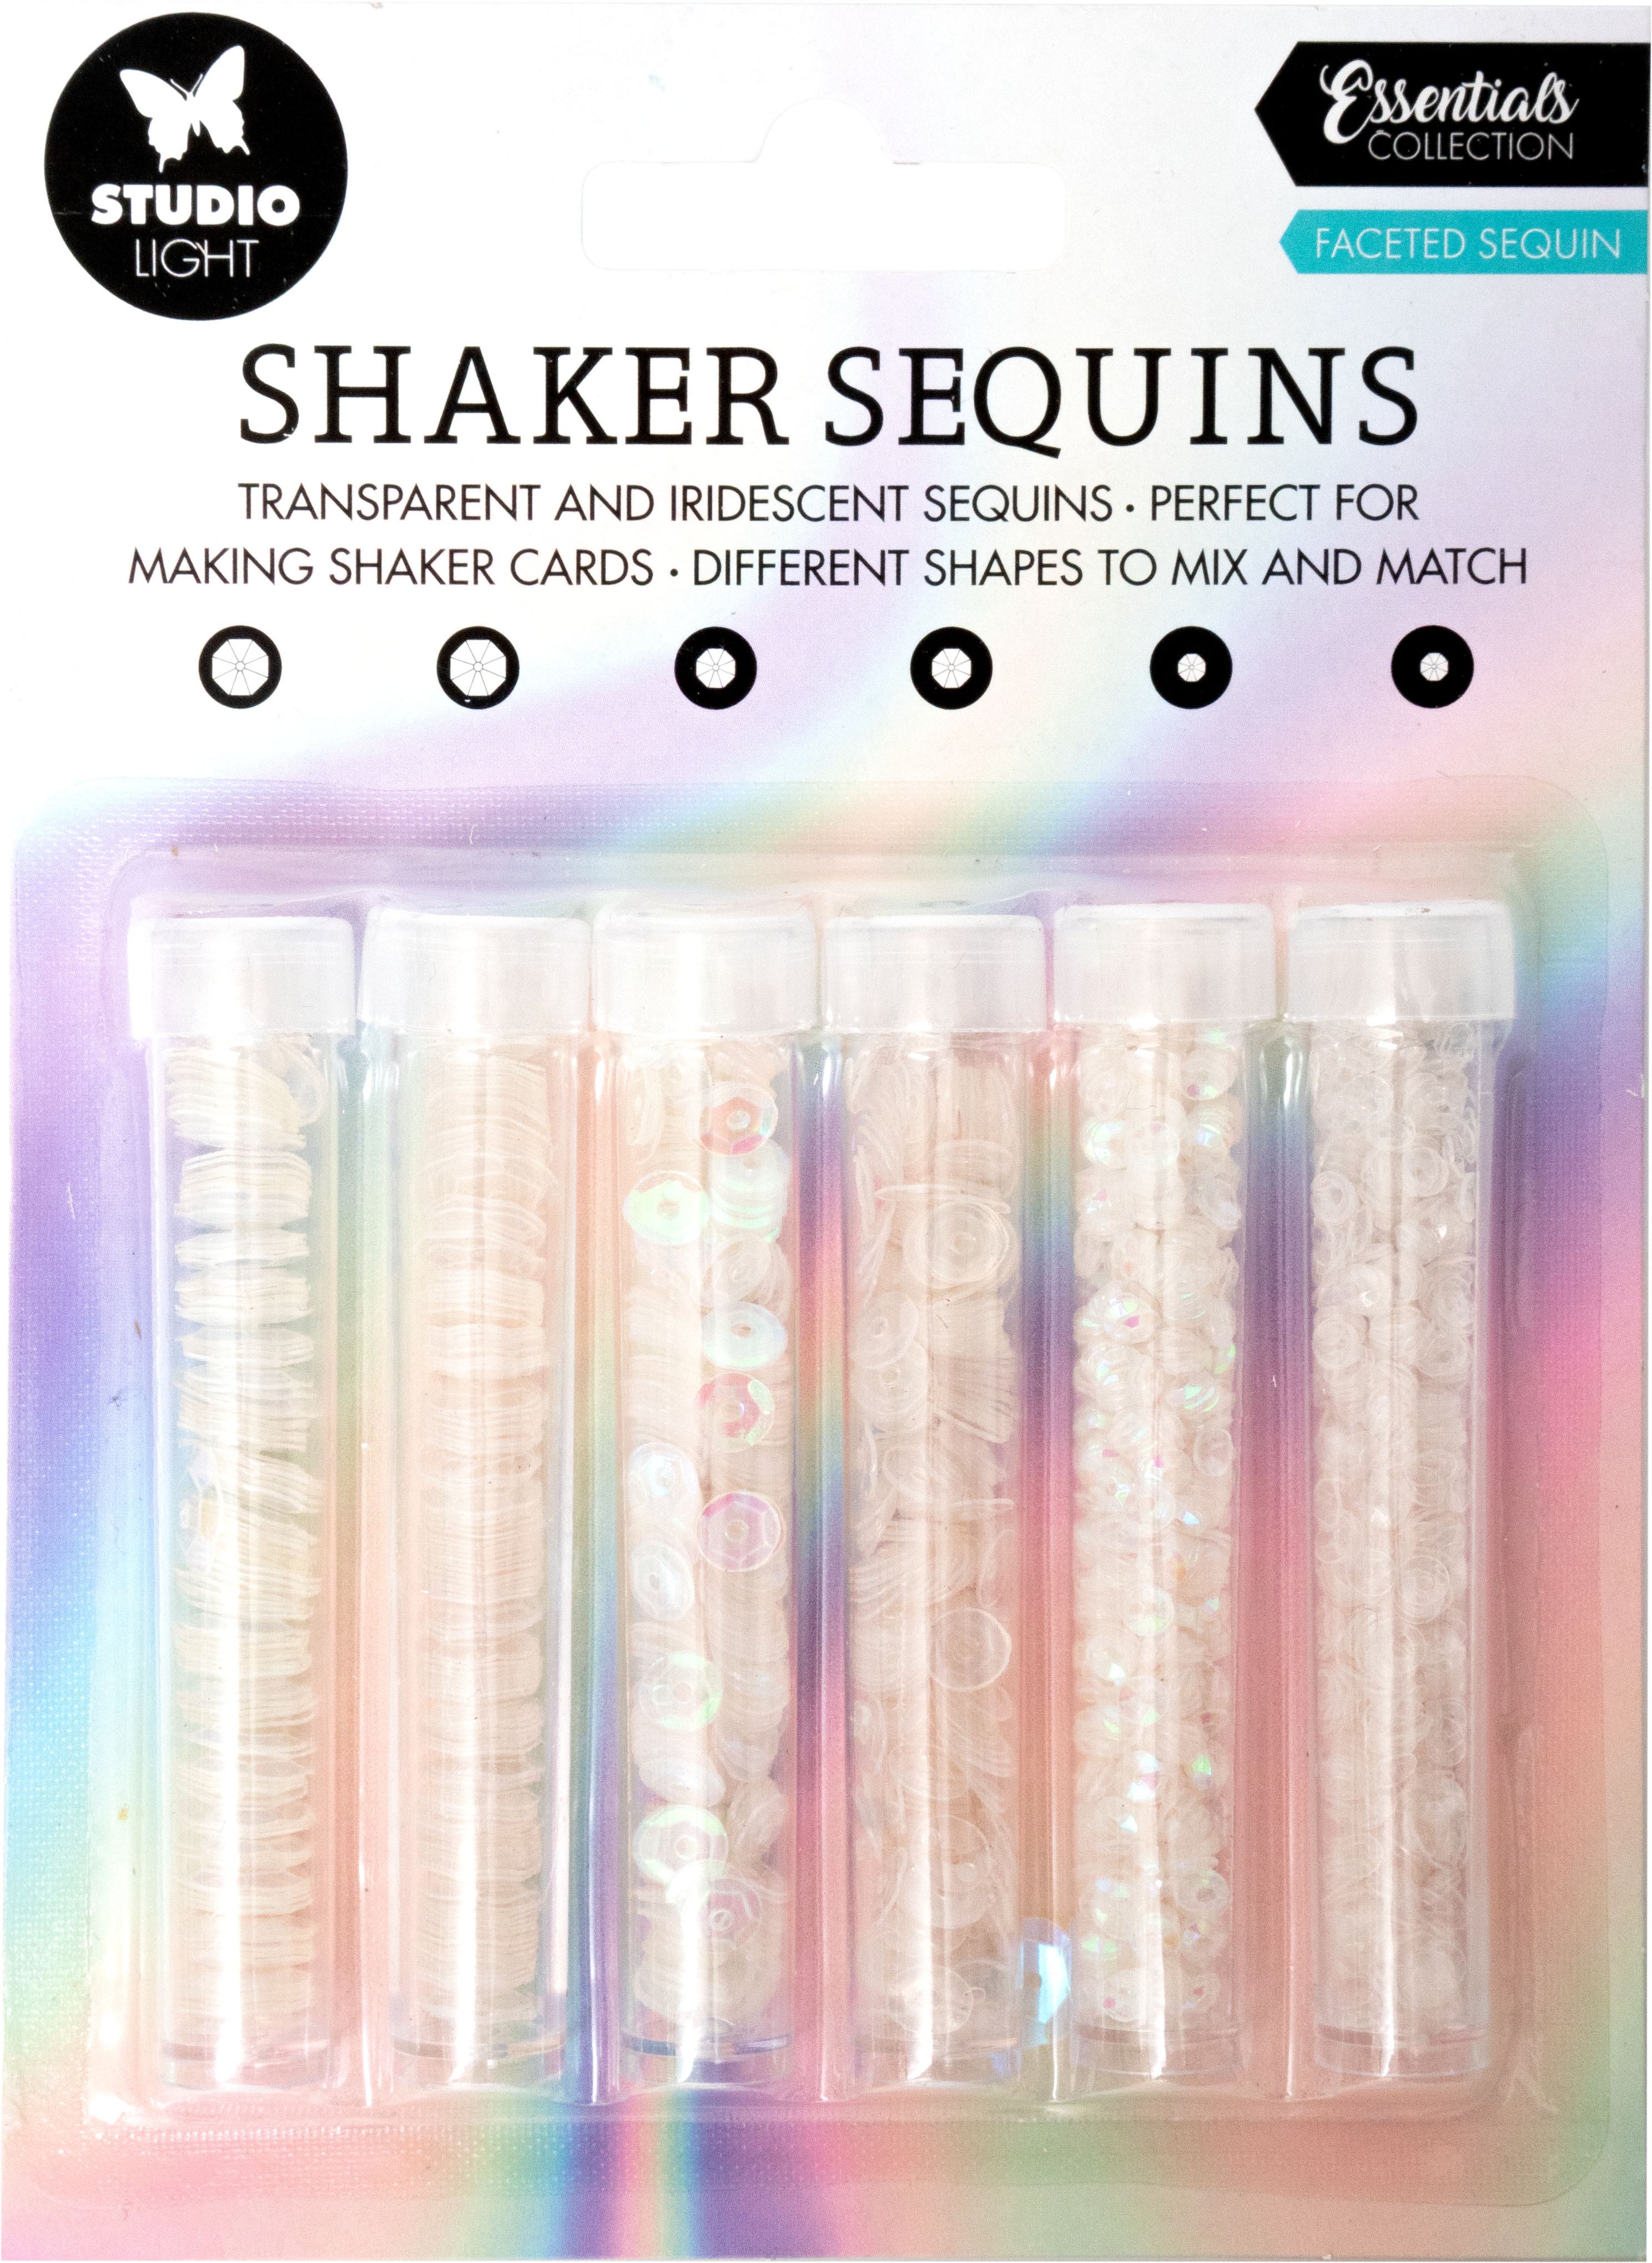 SL Shaker Elements Faceted Sequin Essentials 151x111x15mm 6 PC nr.07